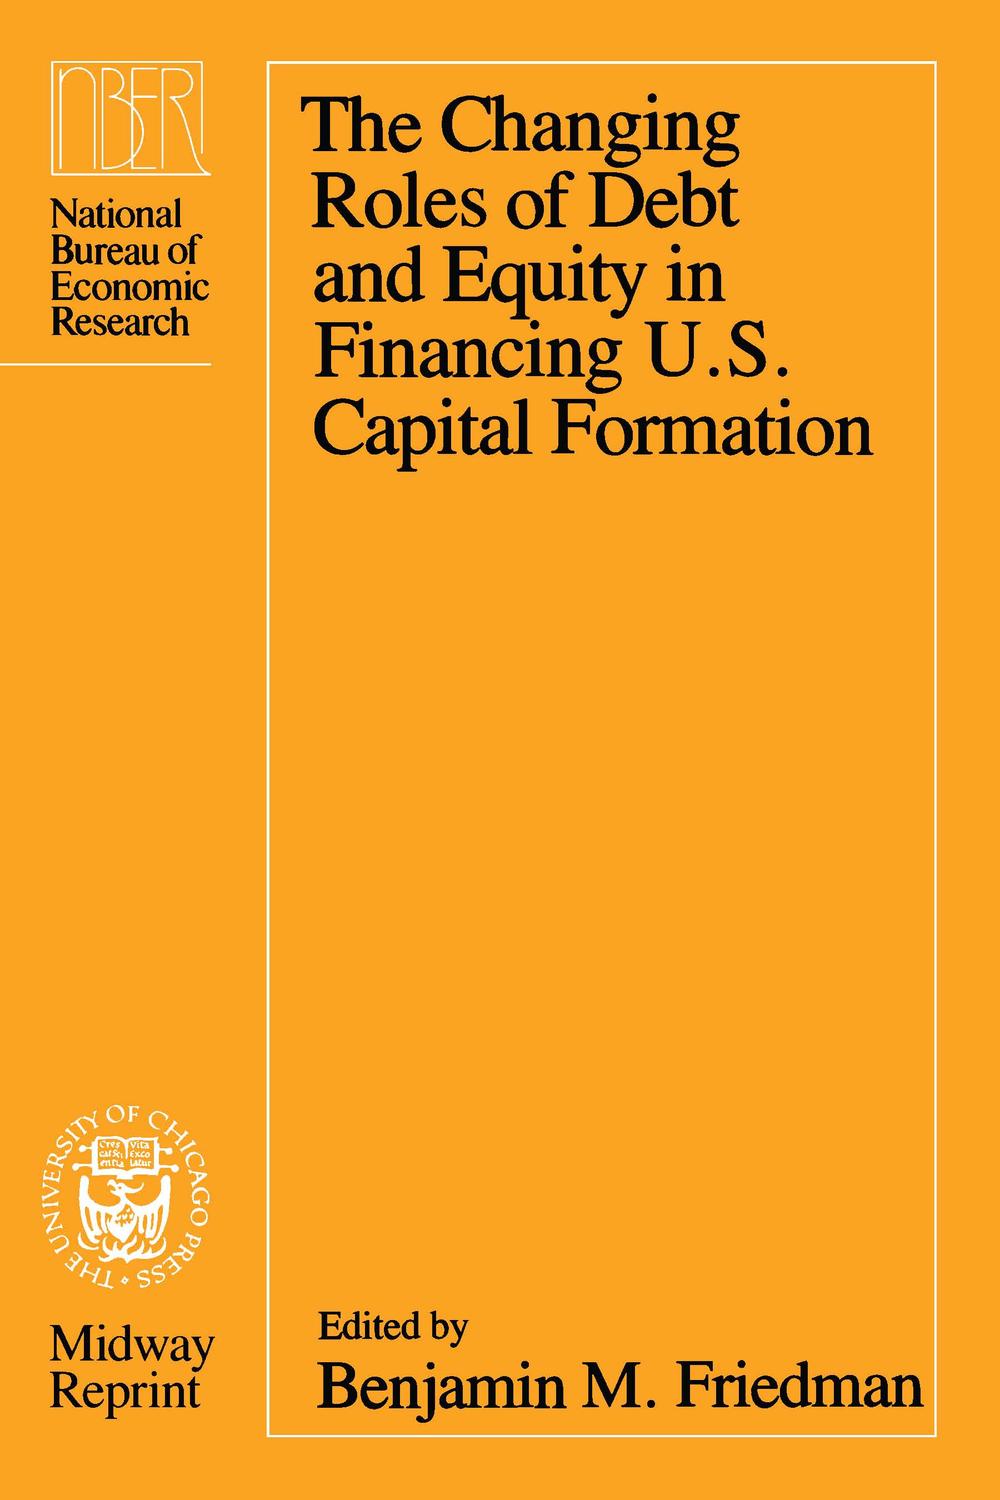 The Changing Roles of Debt and Equity in Financing U.S. Capital Formation - Benjamin M. Friedman,,Benjamin M. Friedman